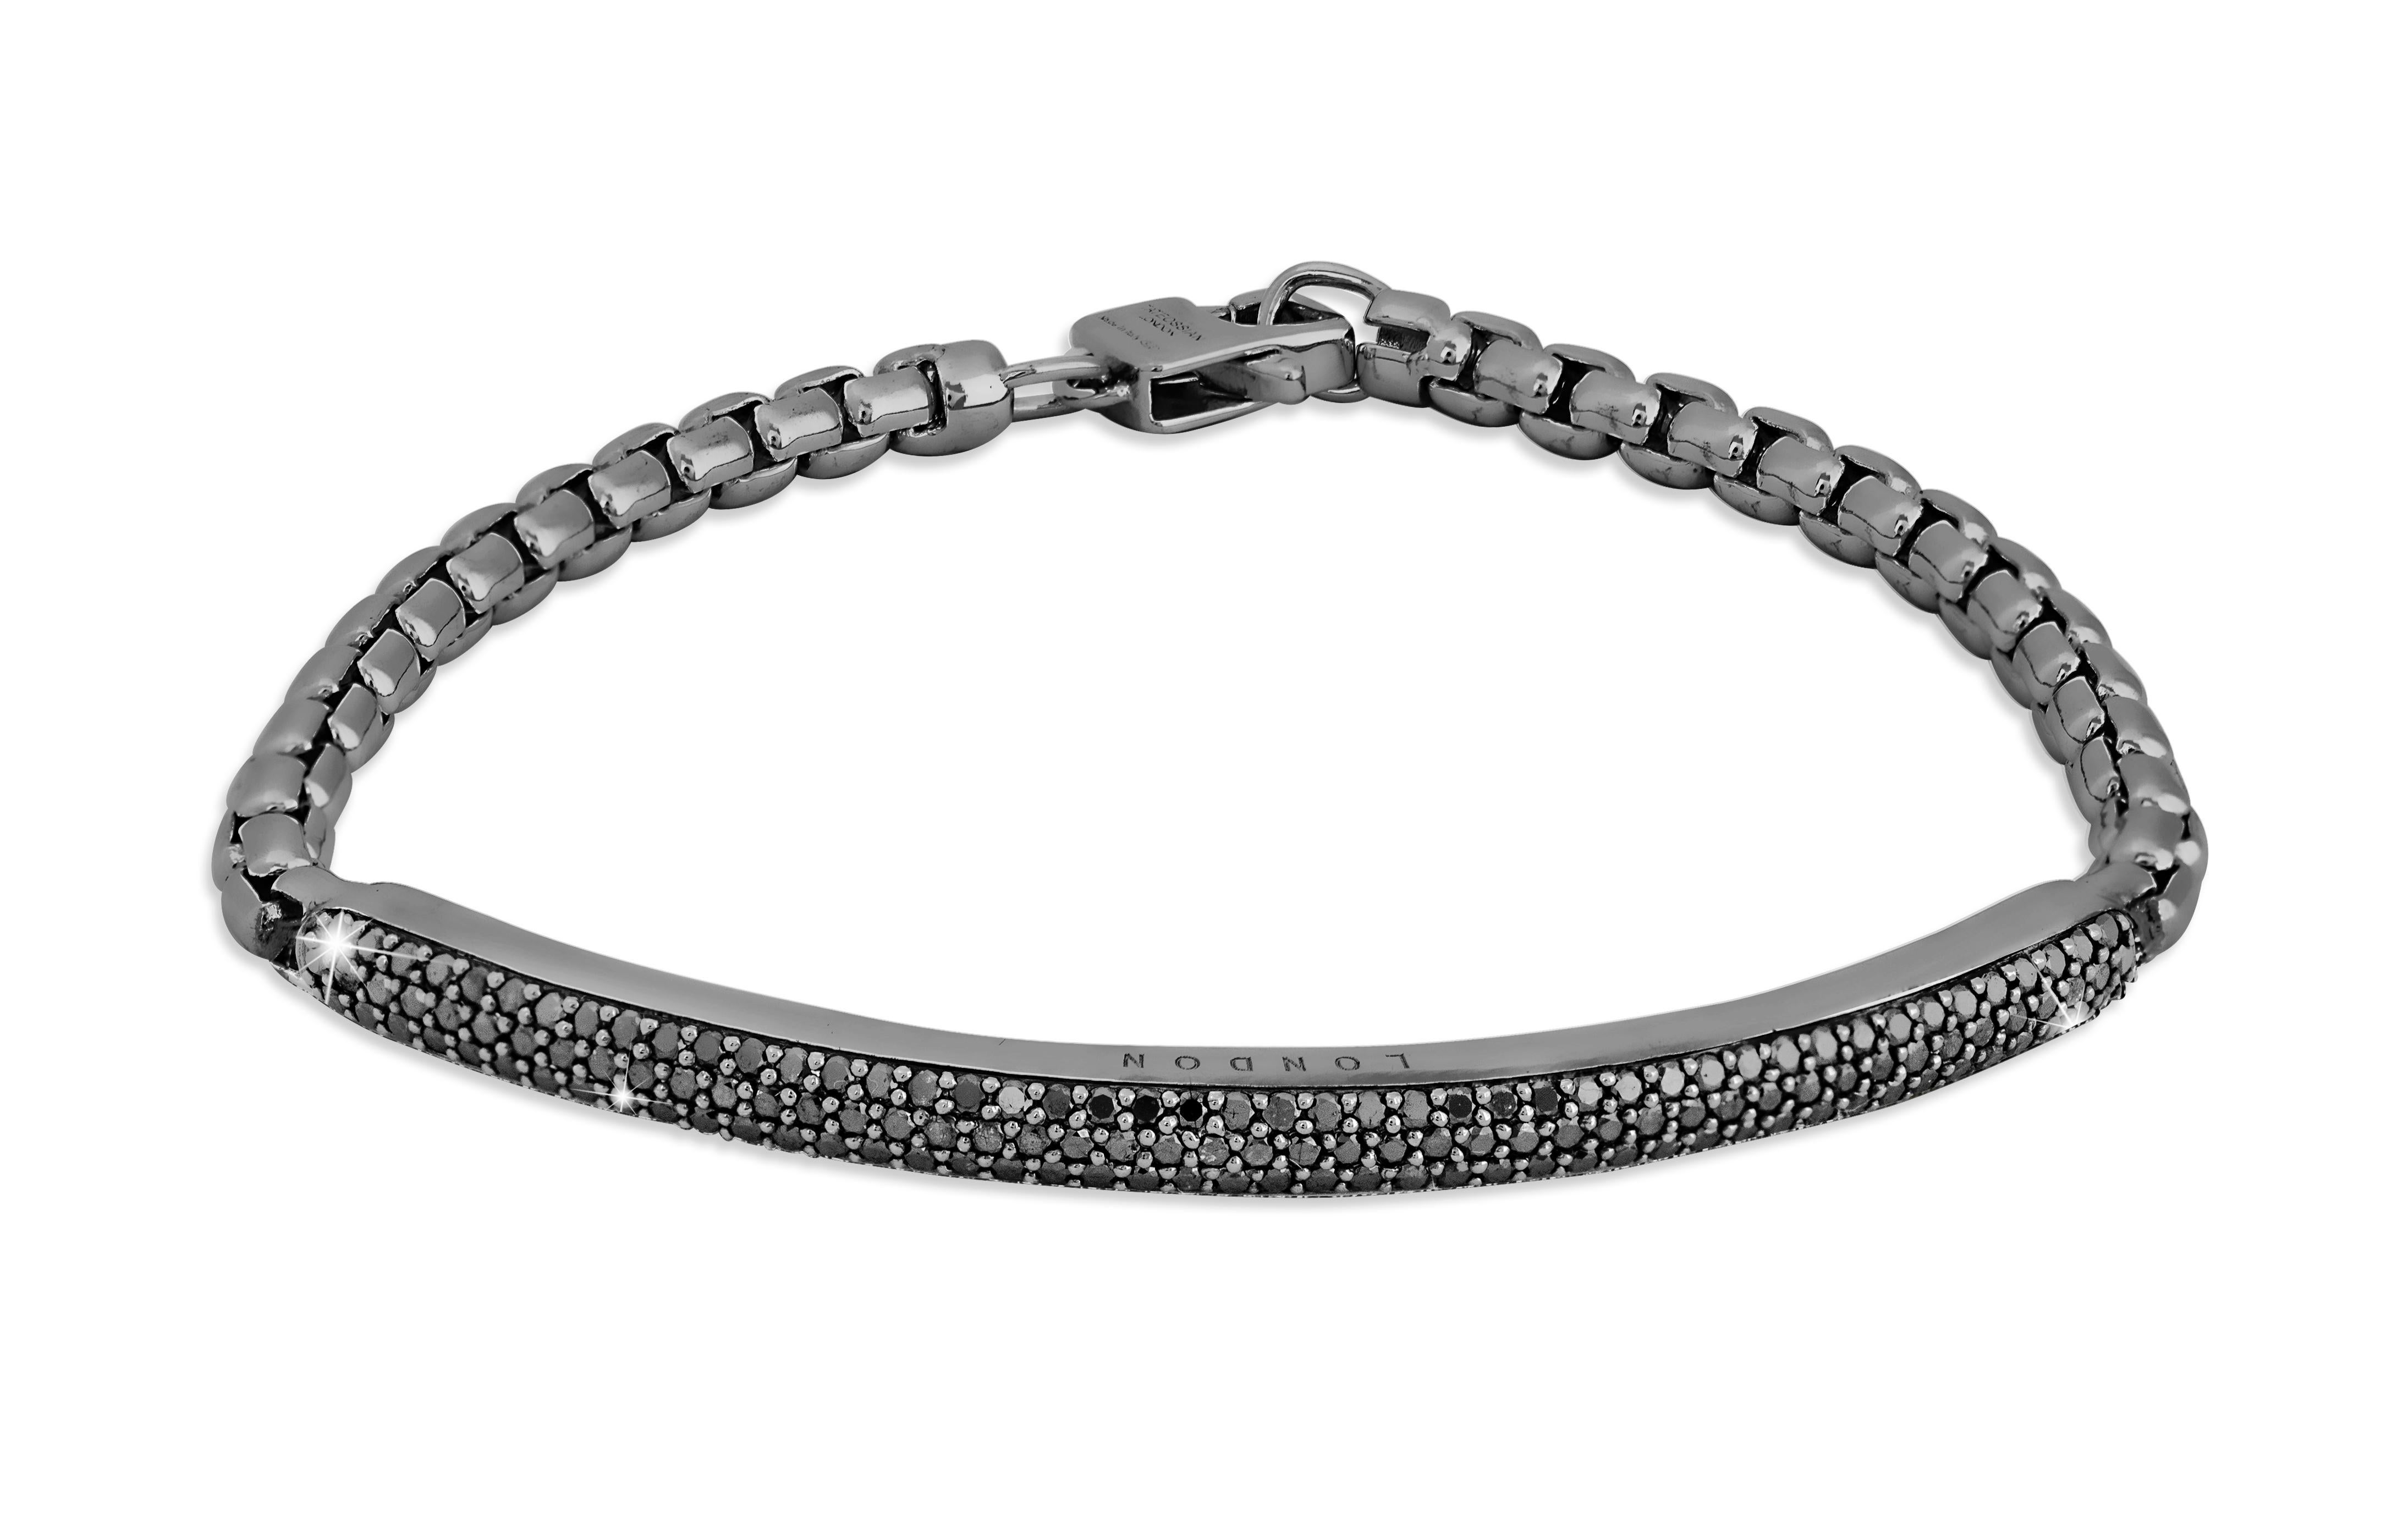 Black Rhodium Plated Sterling Silver Windsor Bracelet with Black Diamonds, Small

This bracelet features a sterling silver ID bar set with a pave surface of 139 black diamonds. All the precious stones are hand-selected and all handset under a